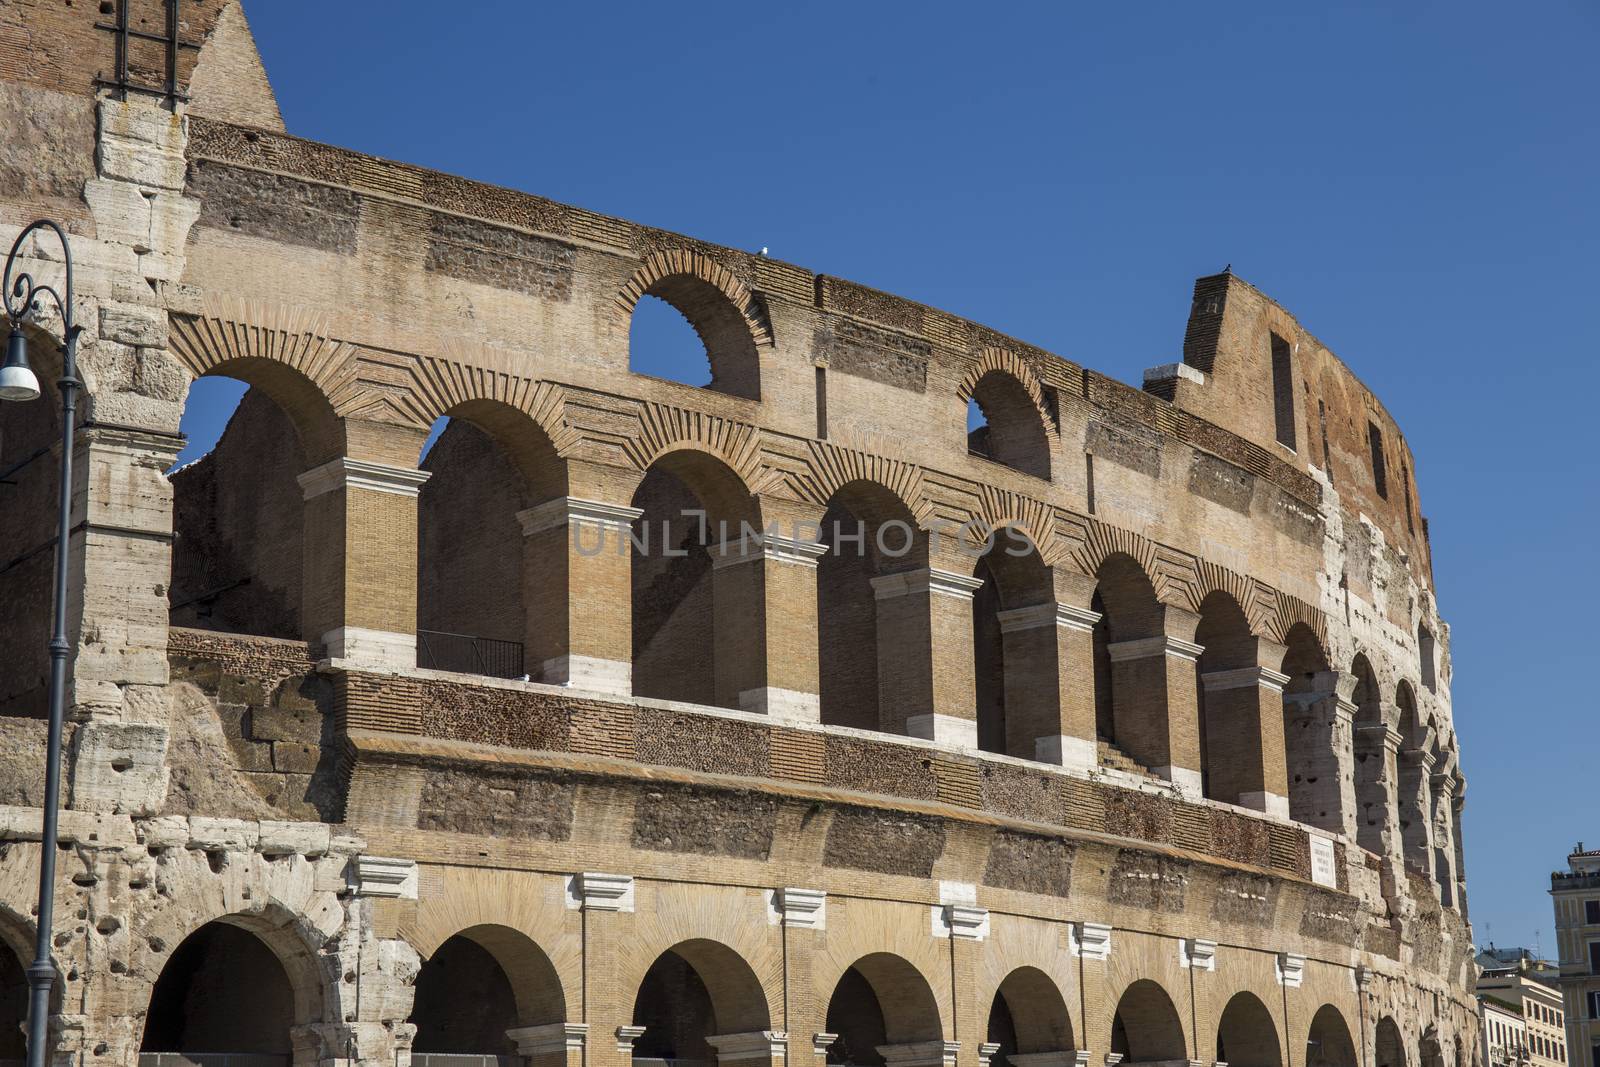 Colosseum in Rome from ground level along the old Roman Road during morning hours, bright and light. Italy, Landmark, Colloseum